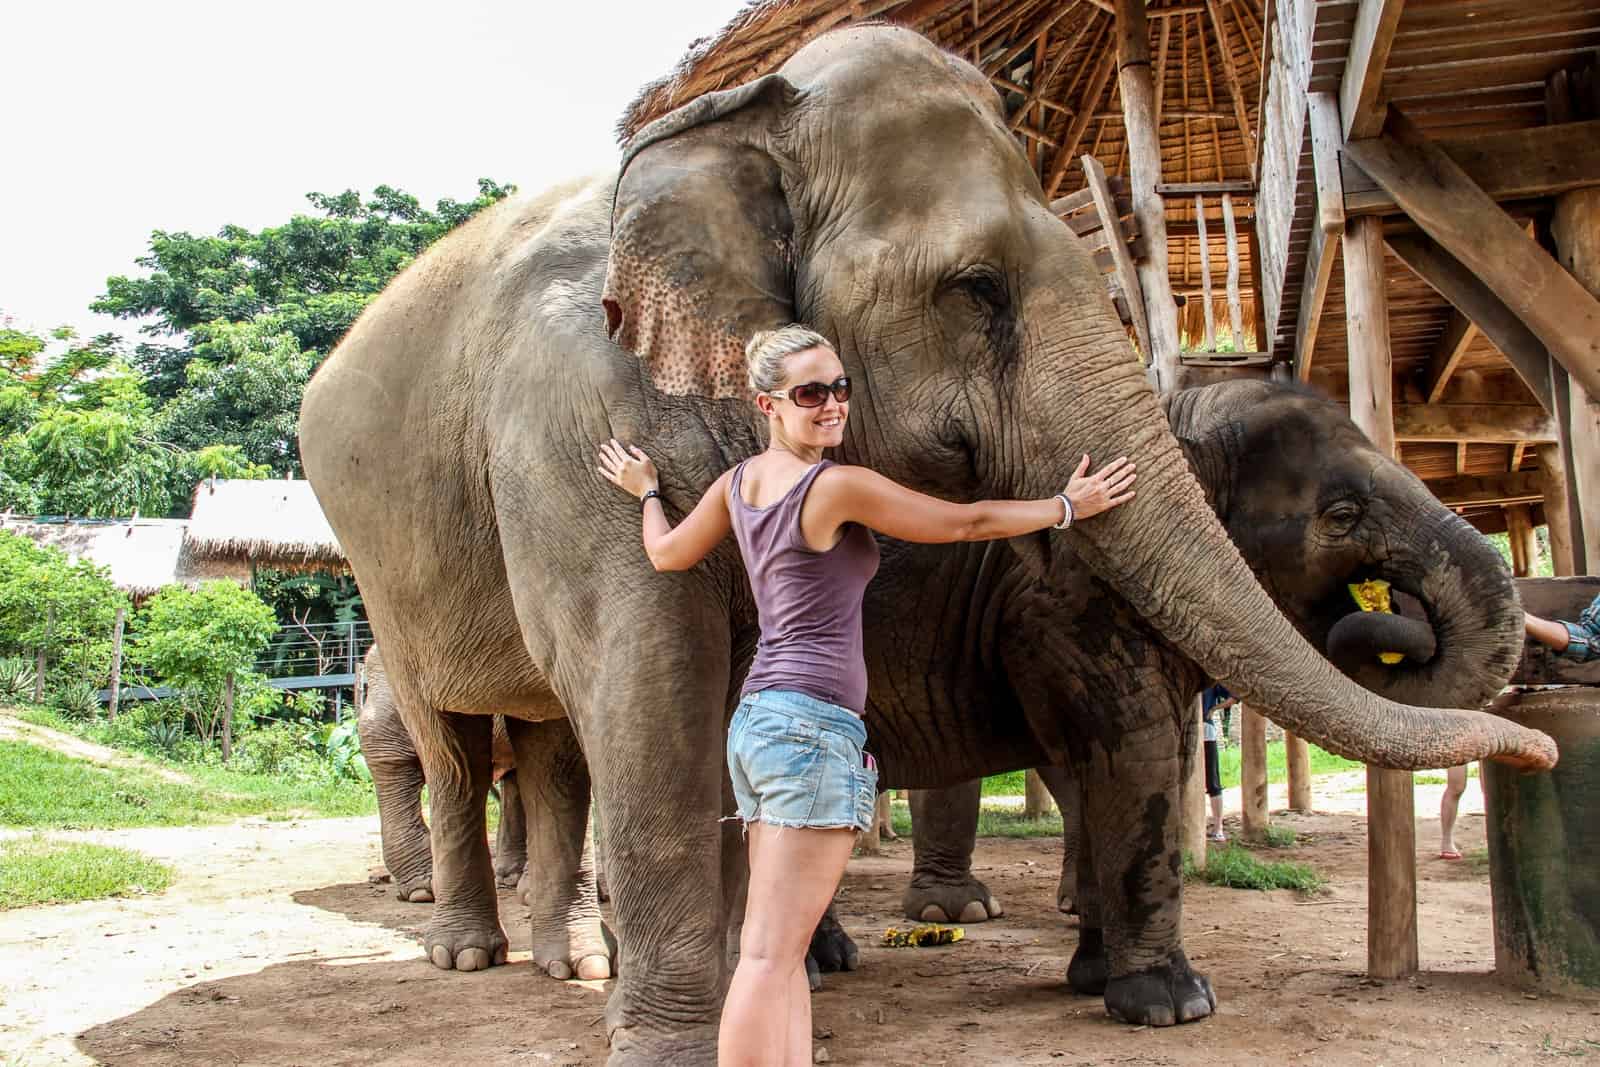 Tourists can get close to elephants without riding them in Elephant Nature Park, Thailand.